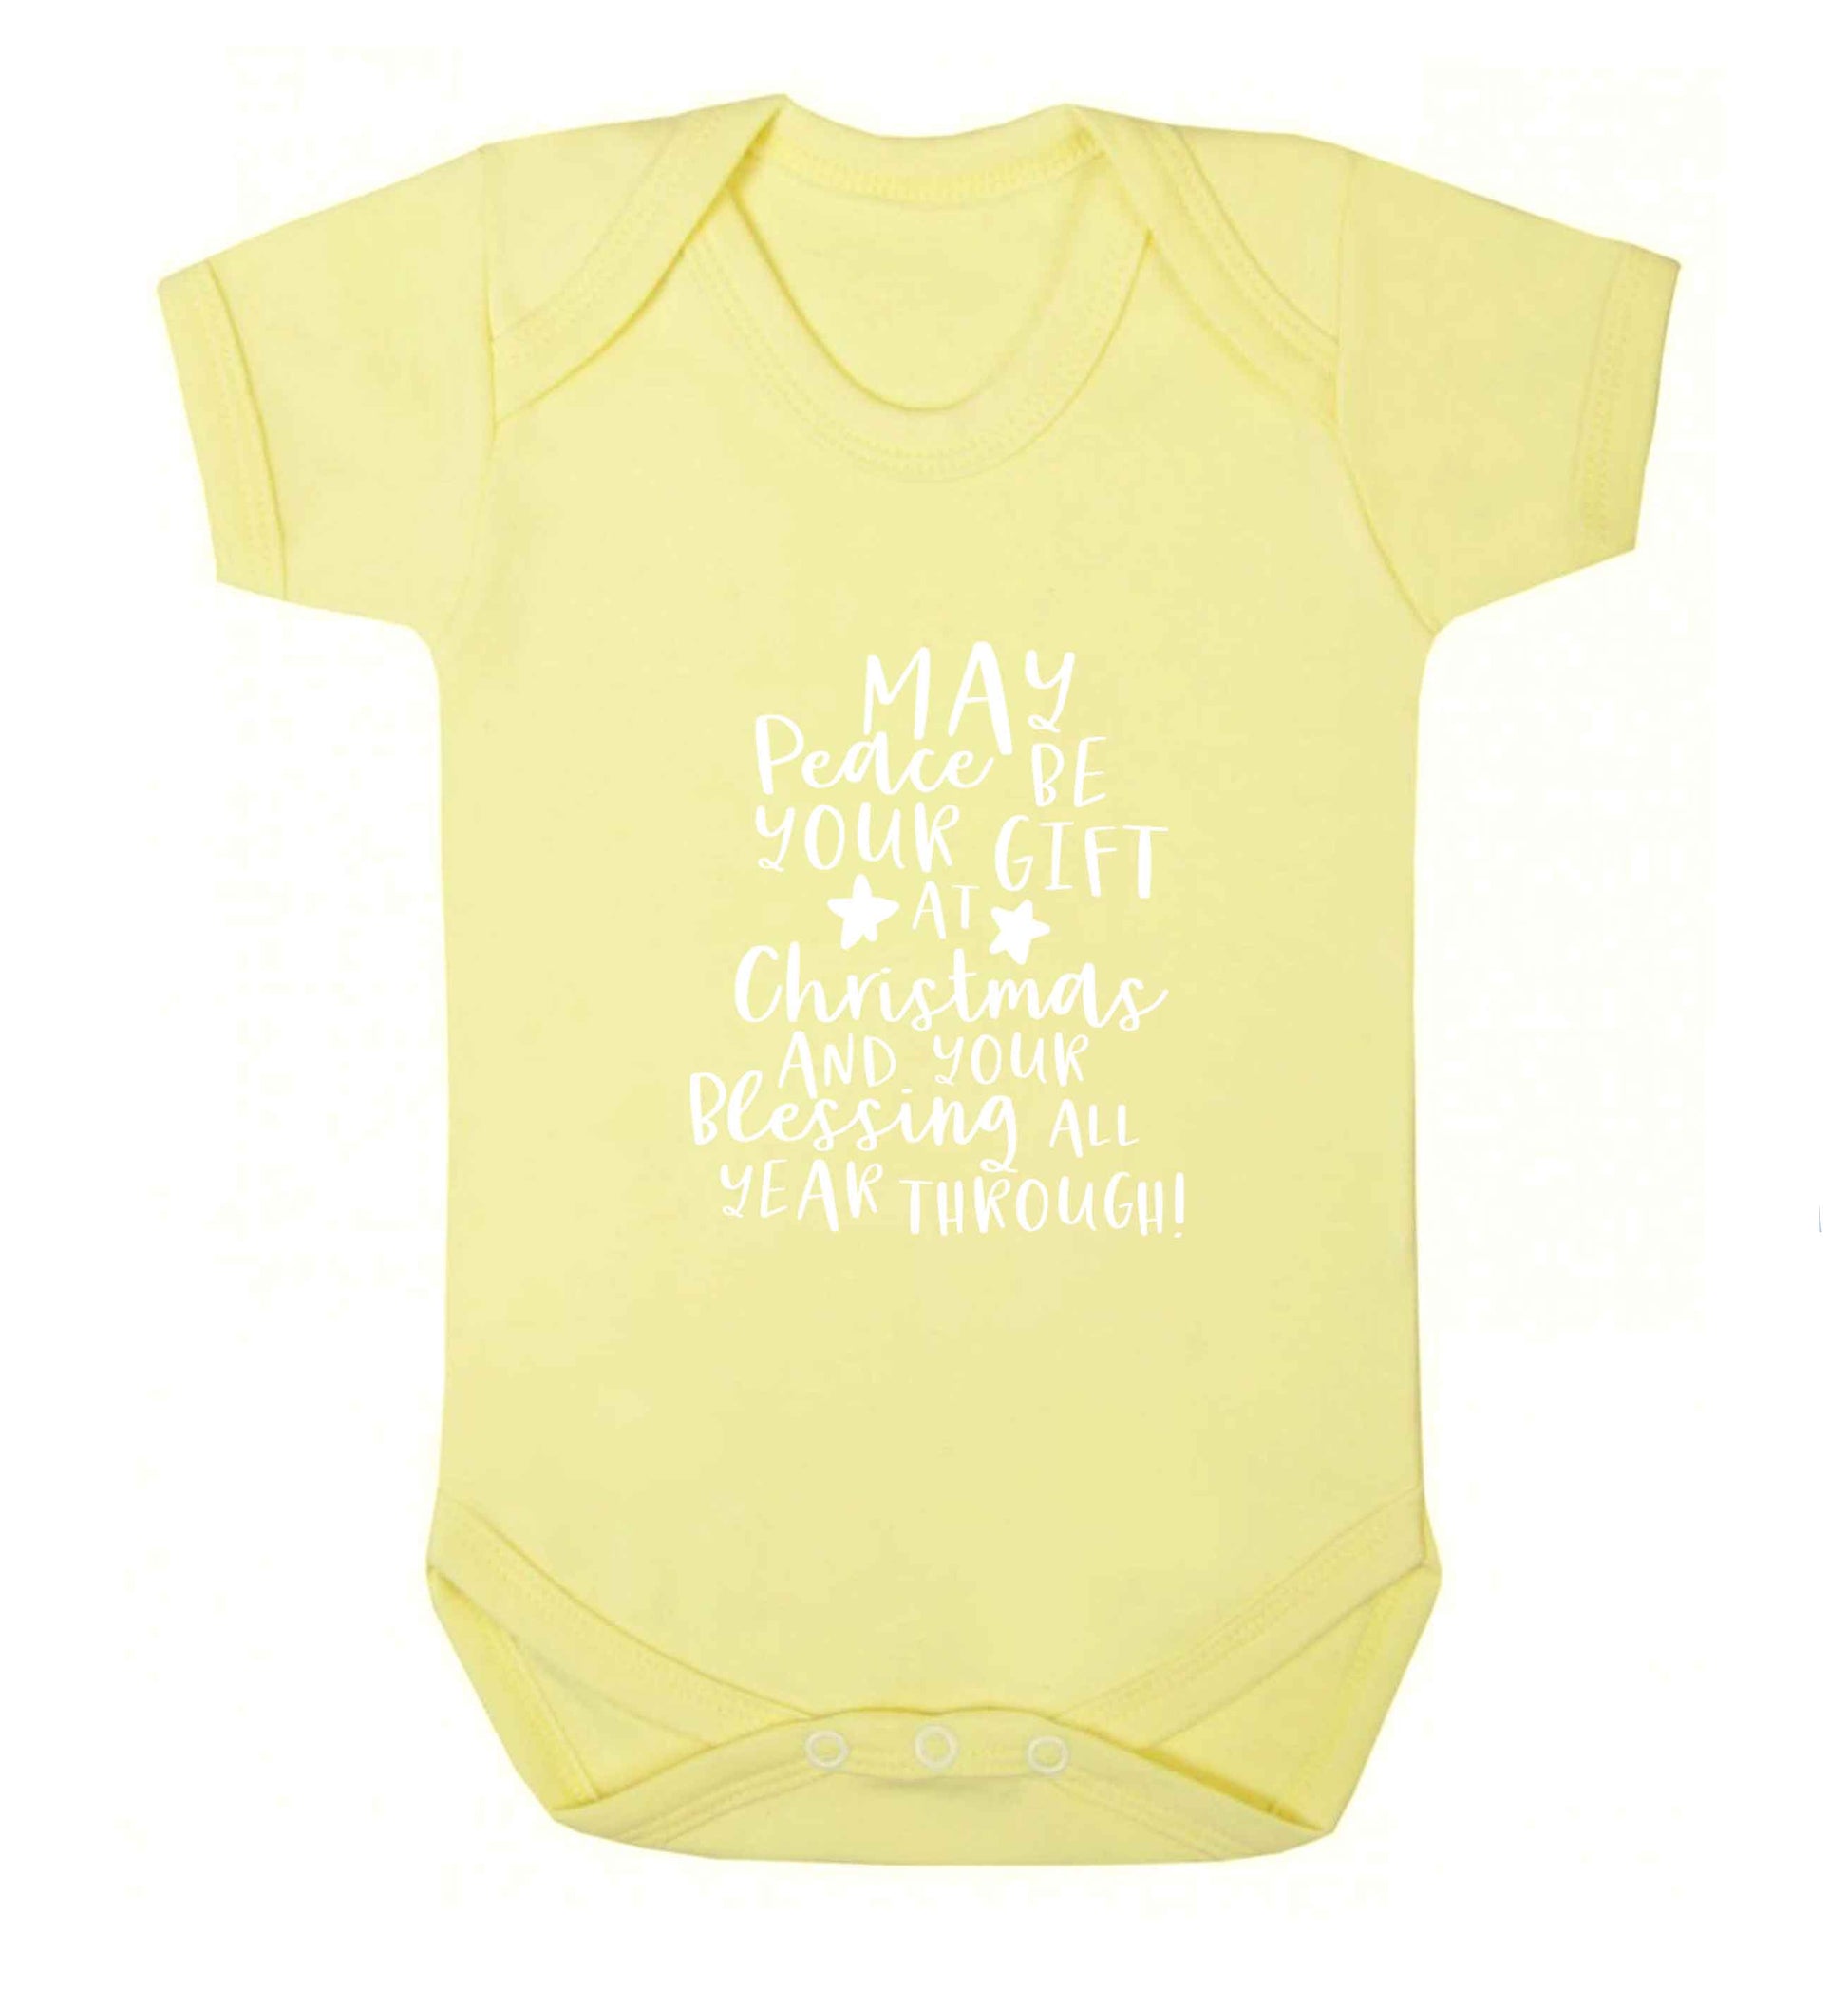 Peace be your Gift at Christmas Gift baby vest pale yellow 18-24 months